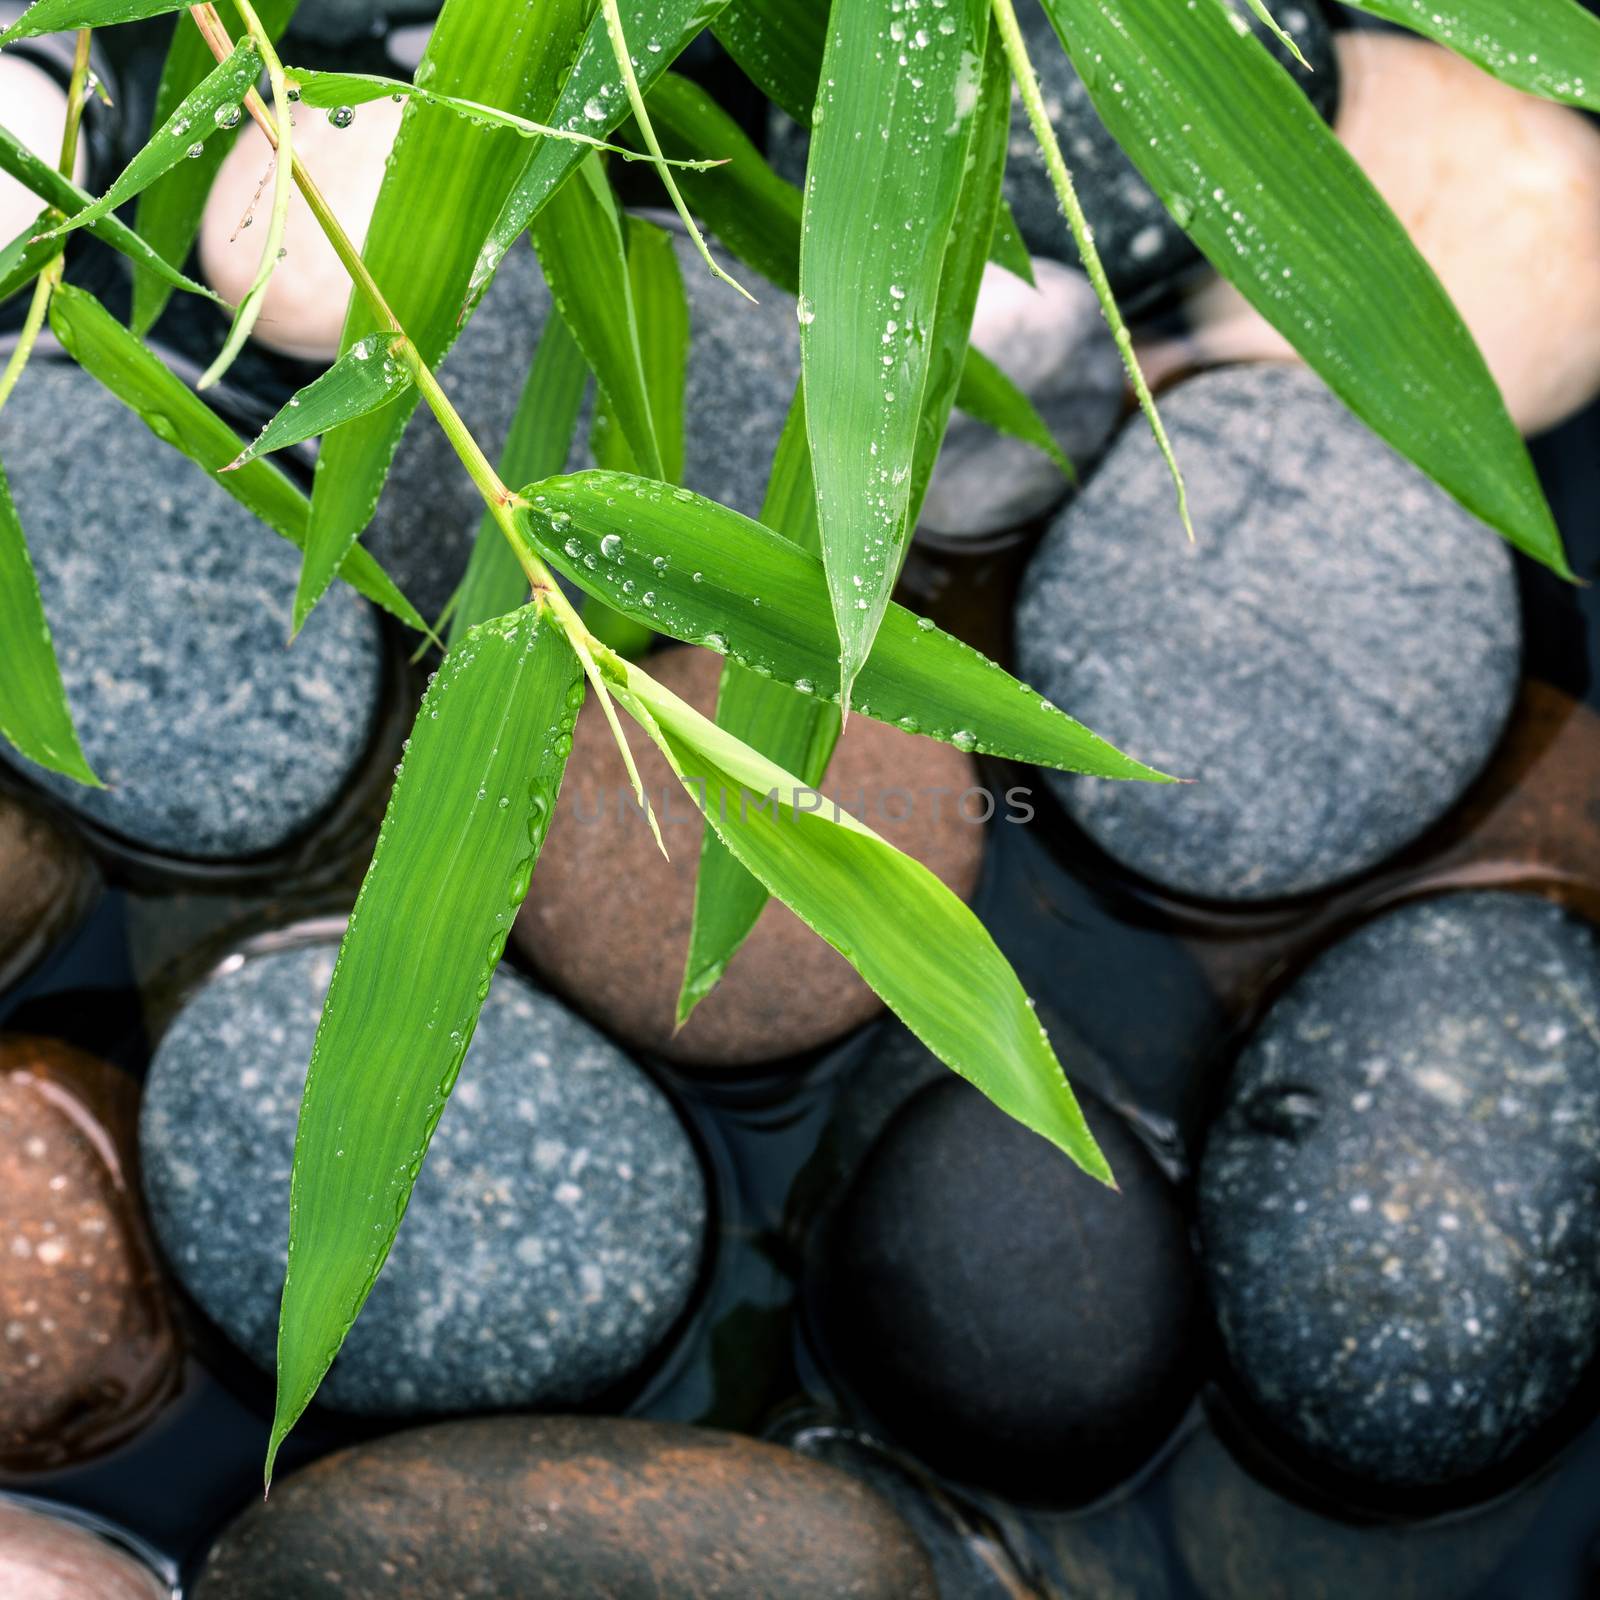 The River Stones spa treatment scene and bamboo leaves with rain by kerdkanno